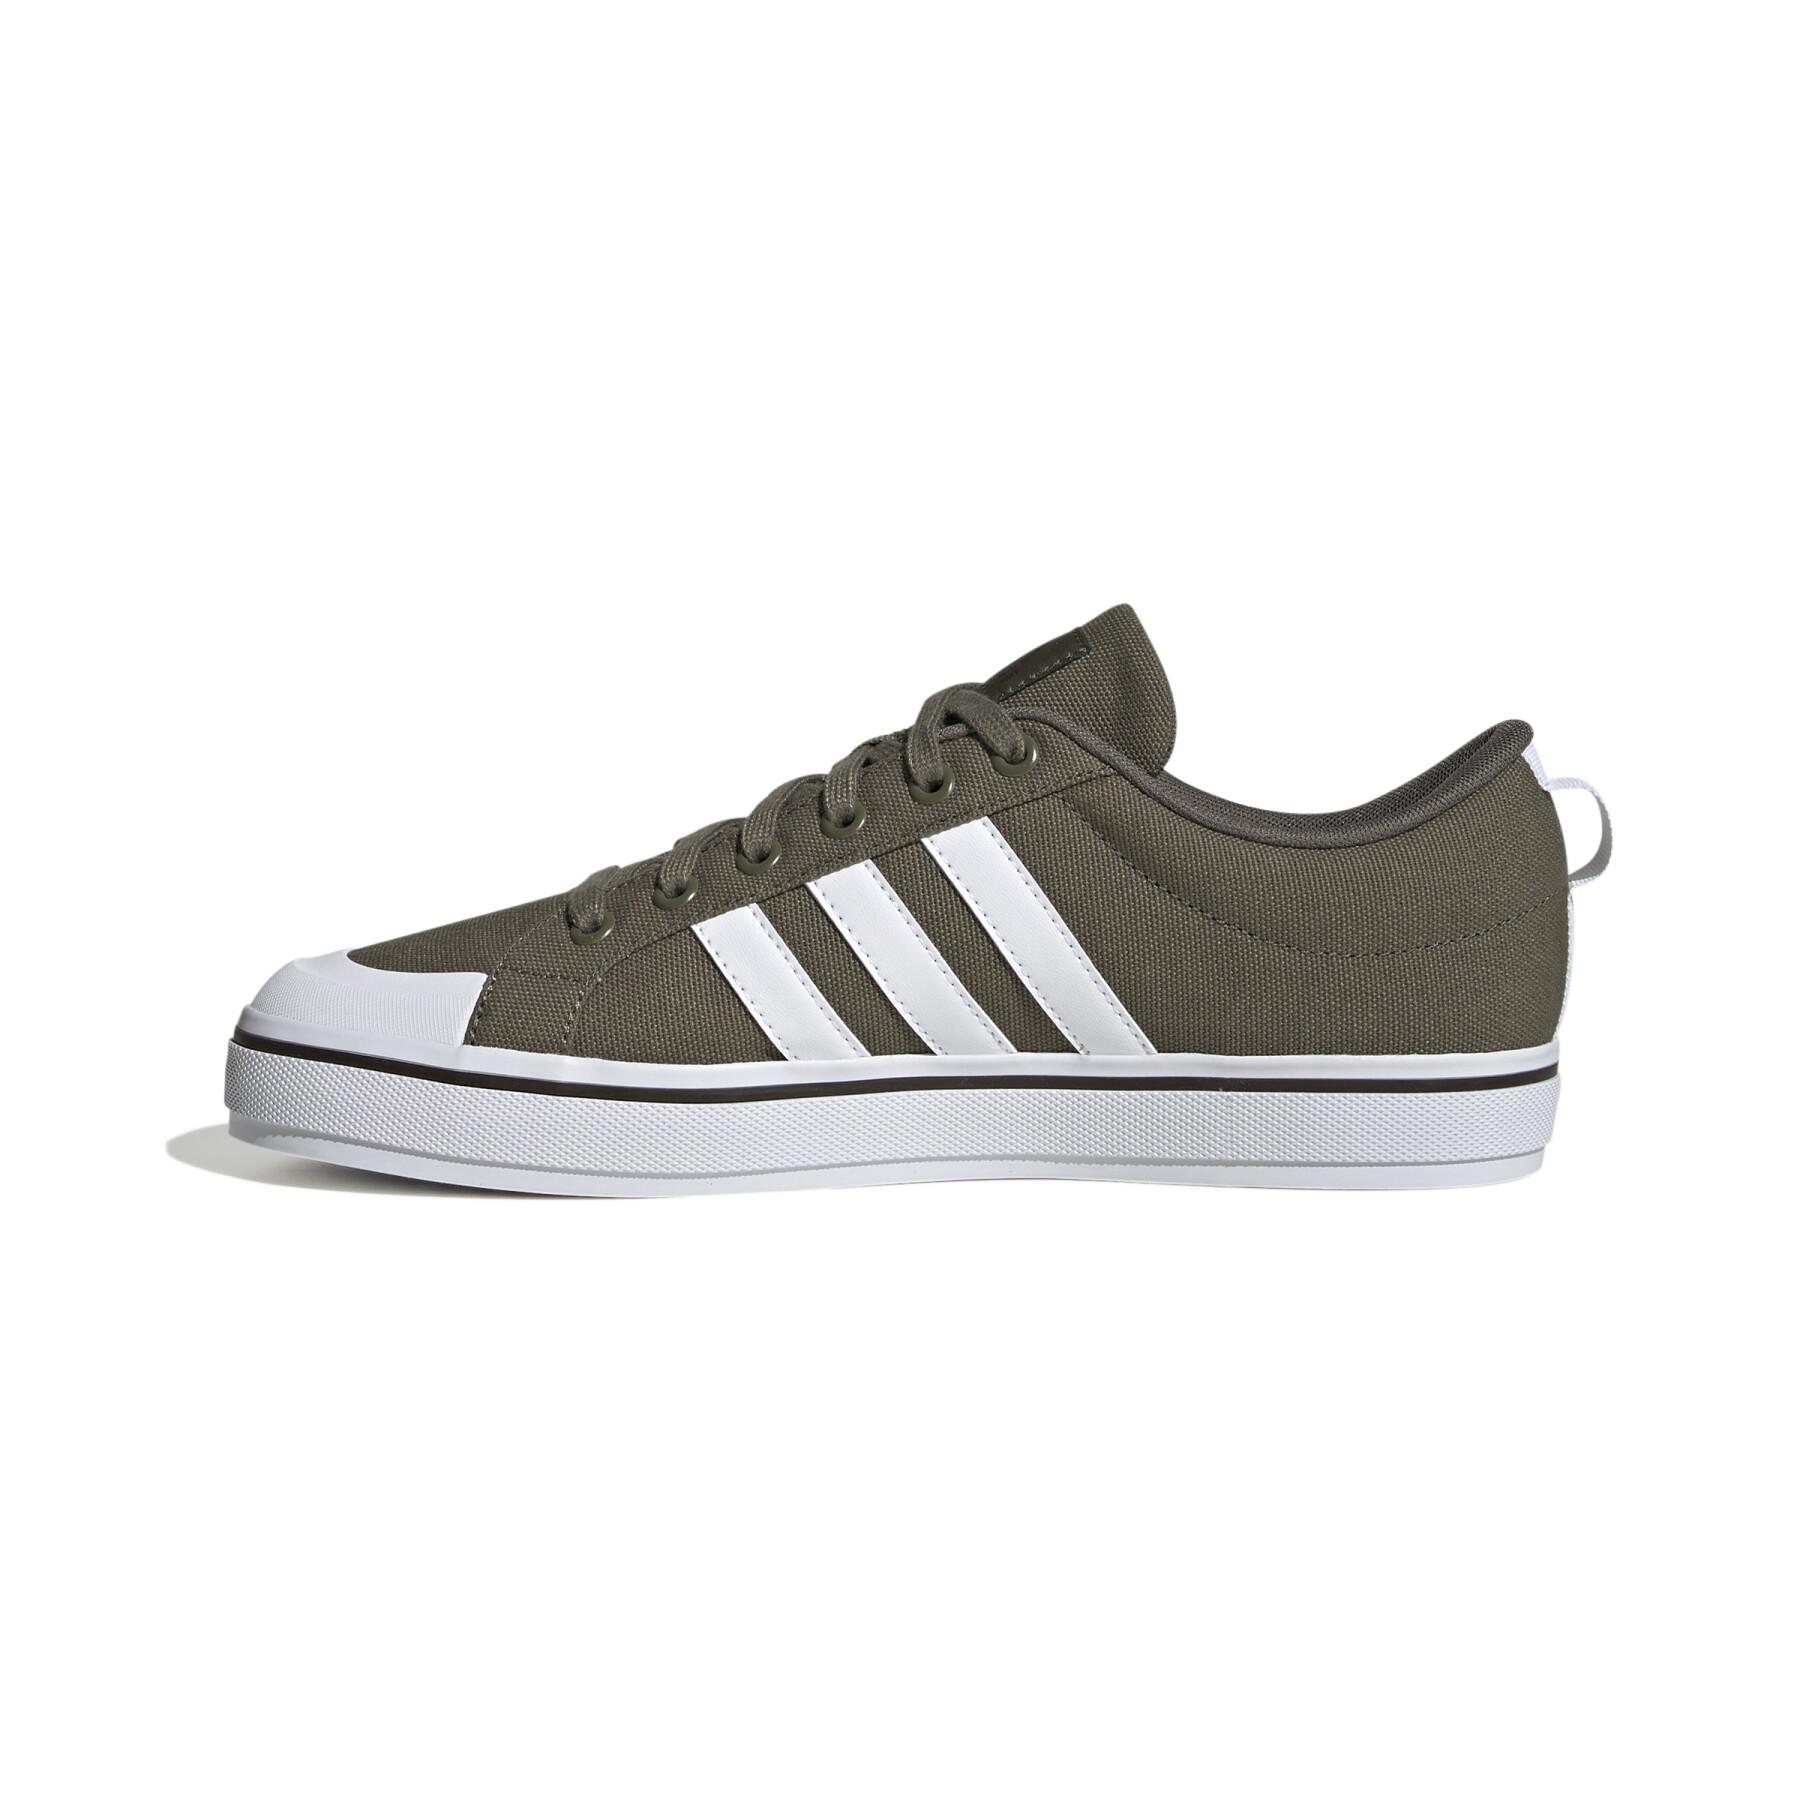 Sneakers adidas Vl Court 2.0